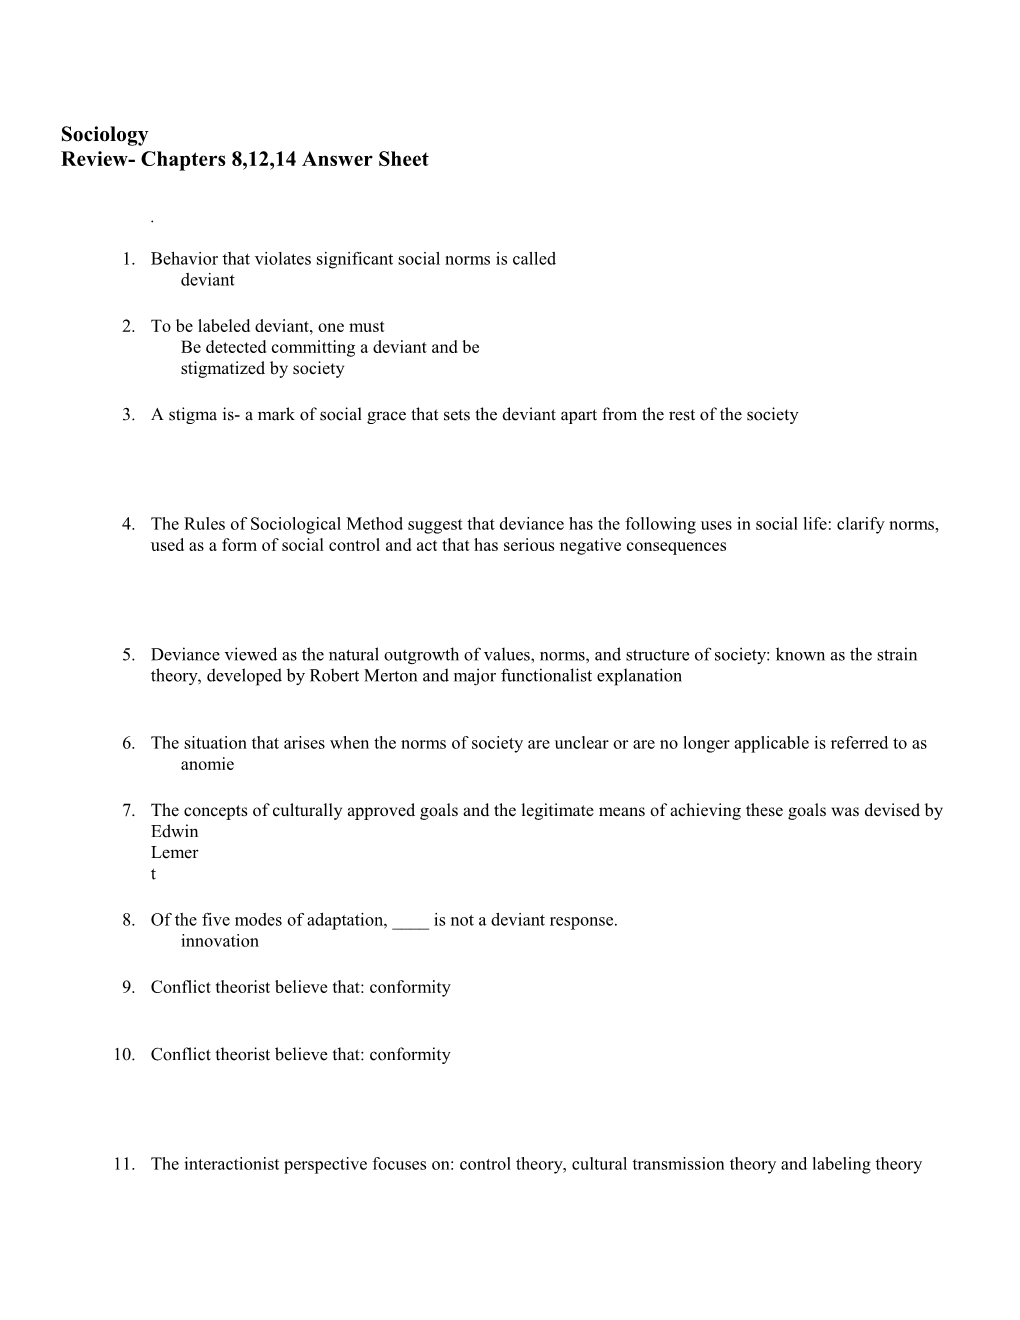 Review- Chapters 8,12,14 Answer Sheet